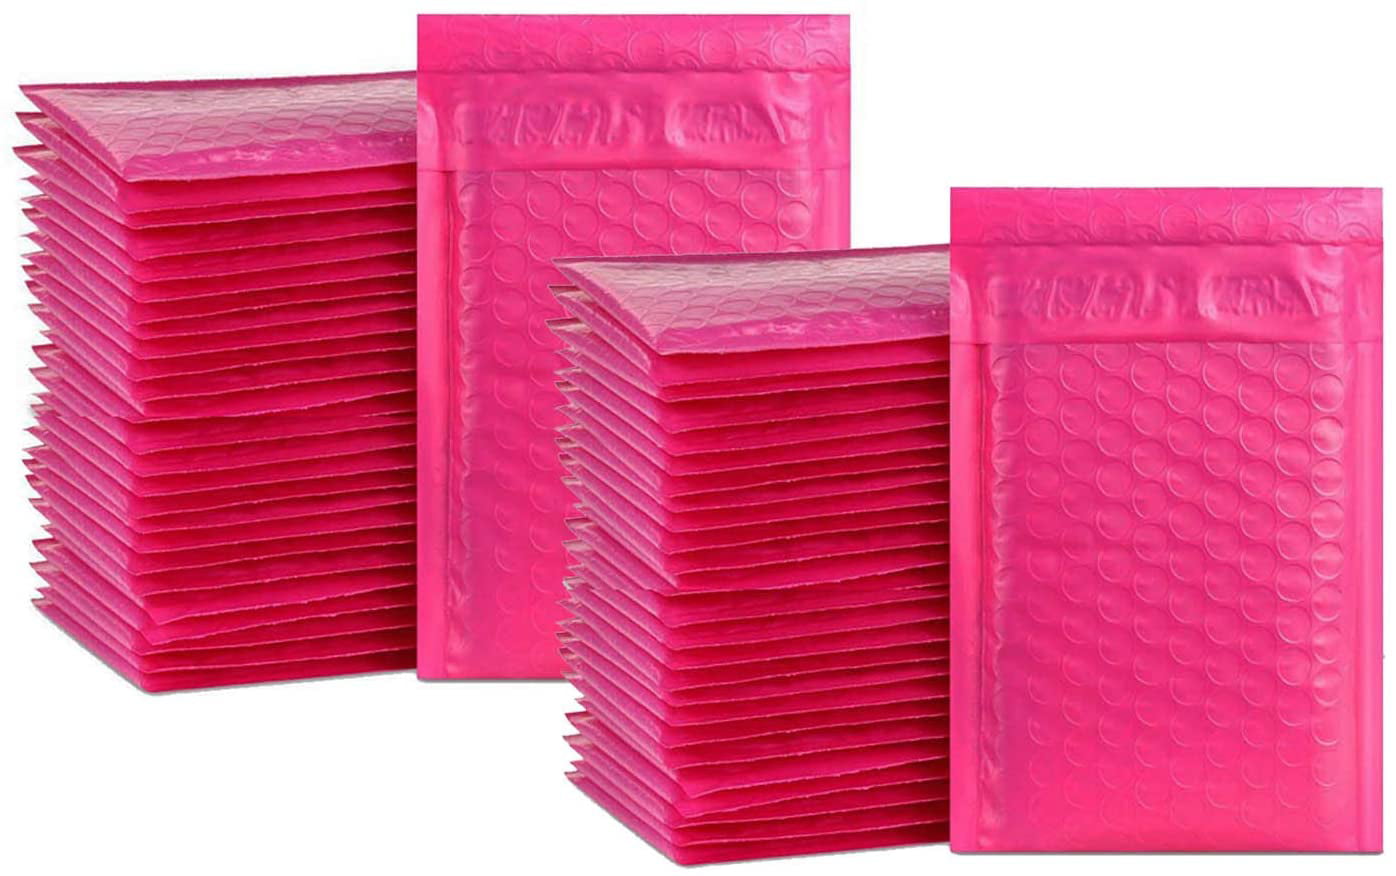 Details about   20/50PCS Pink Poly Bubble Mailer Padded Bag Shipping Self Mailing Envelope New 